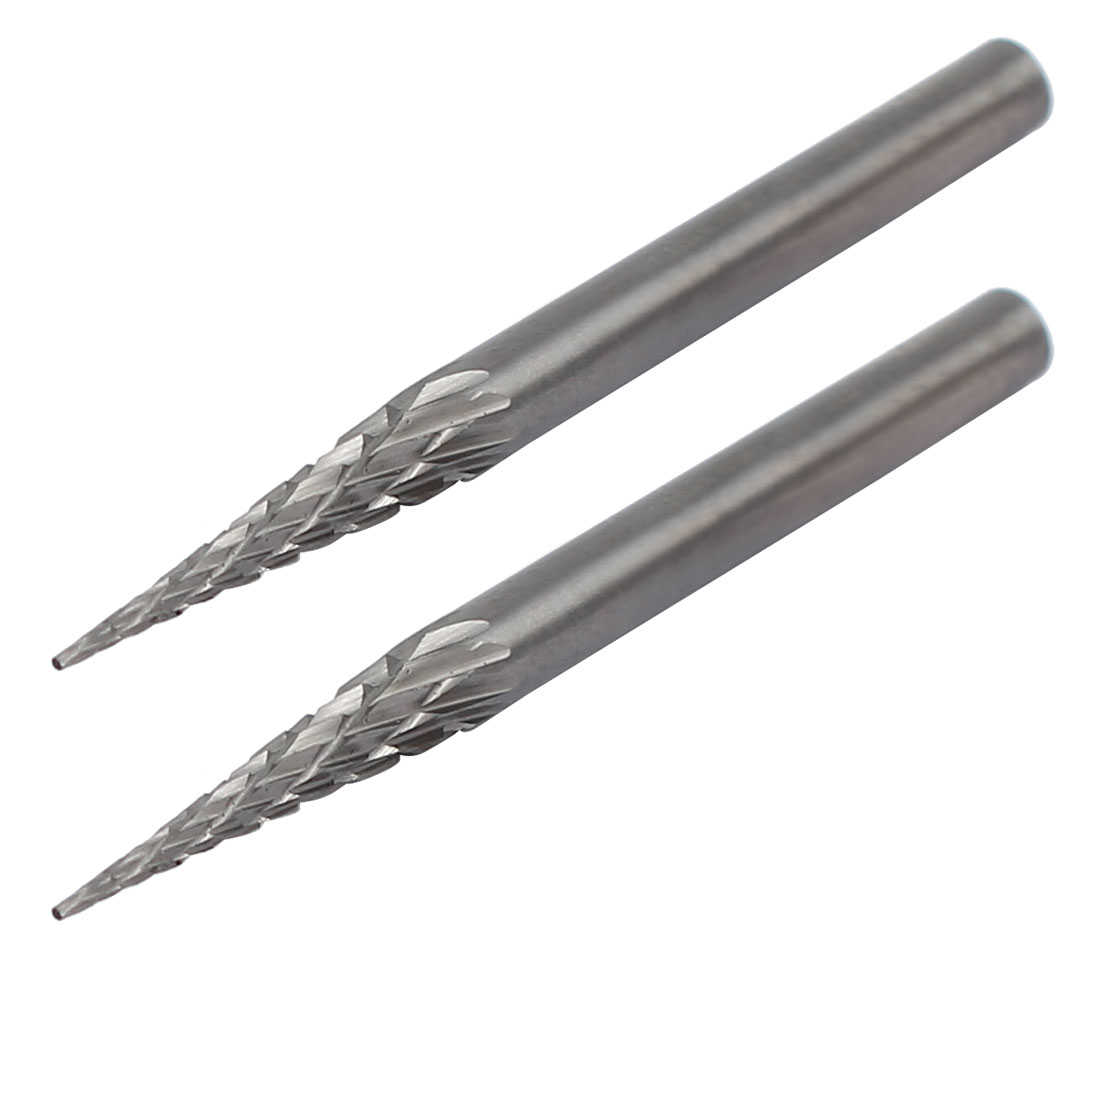 3mm Shank 3mm Dia Head Double Cut Arc Pointed Nose Shaped Rotary File 2pcs